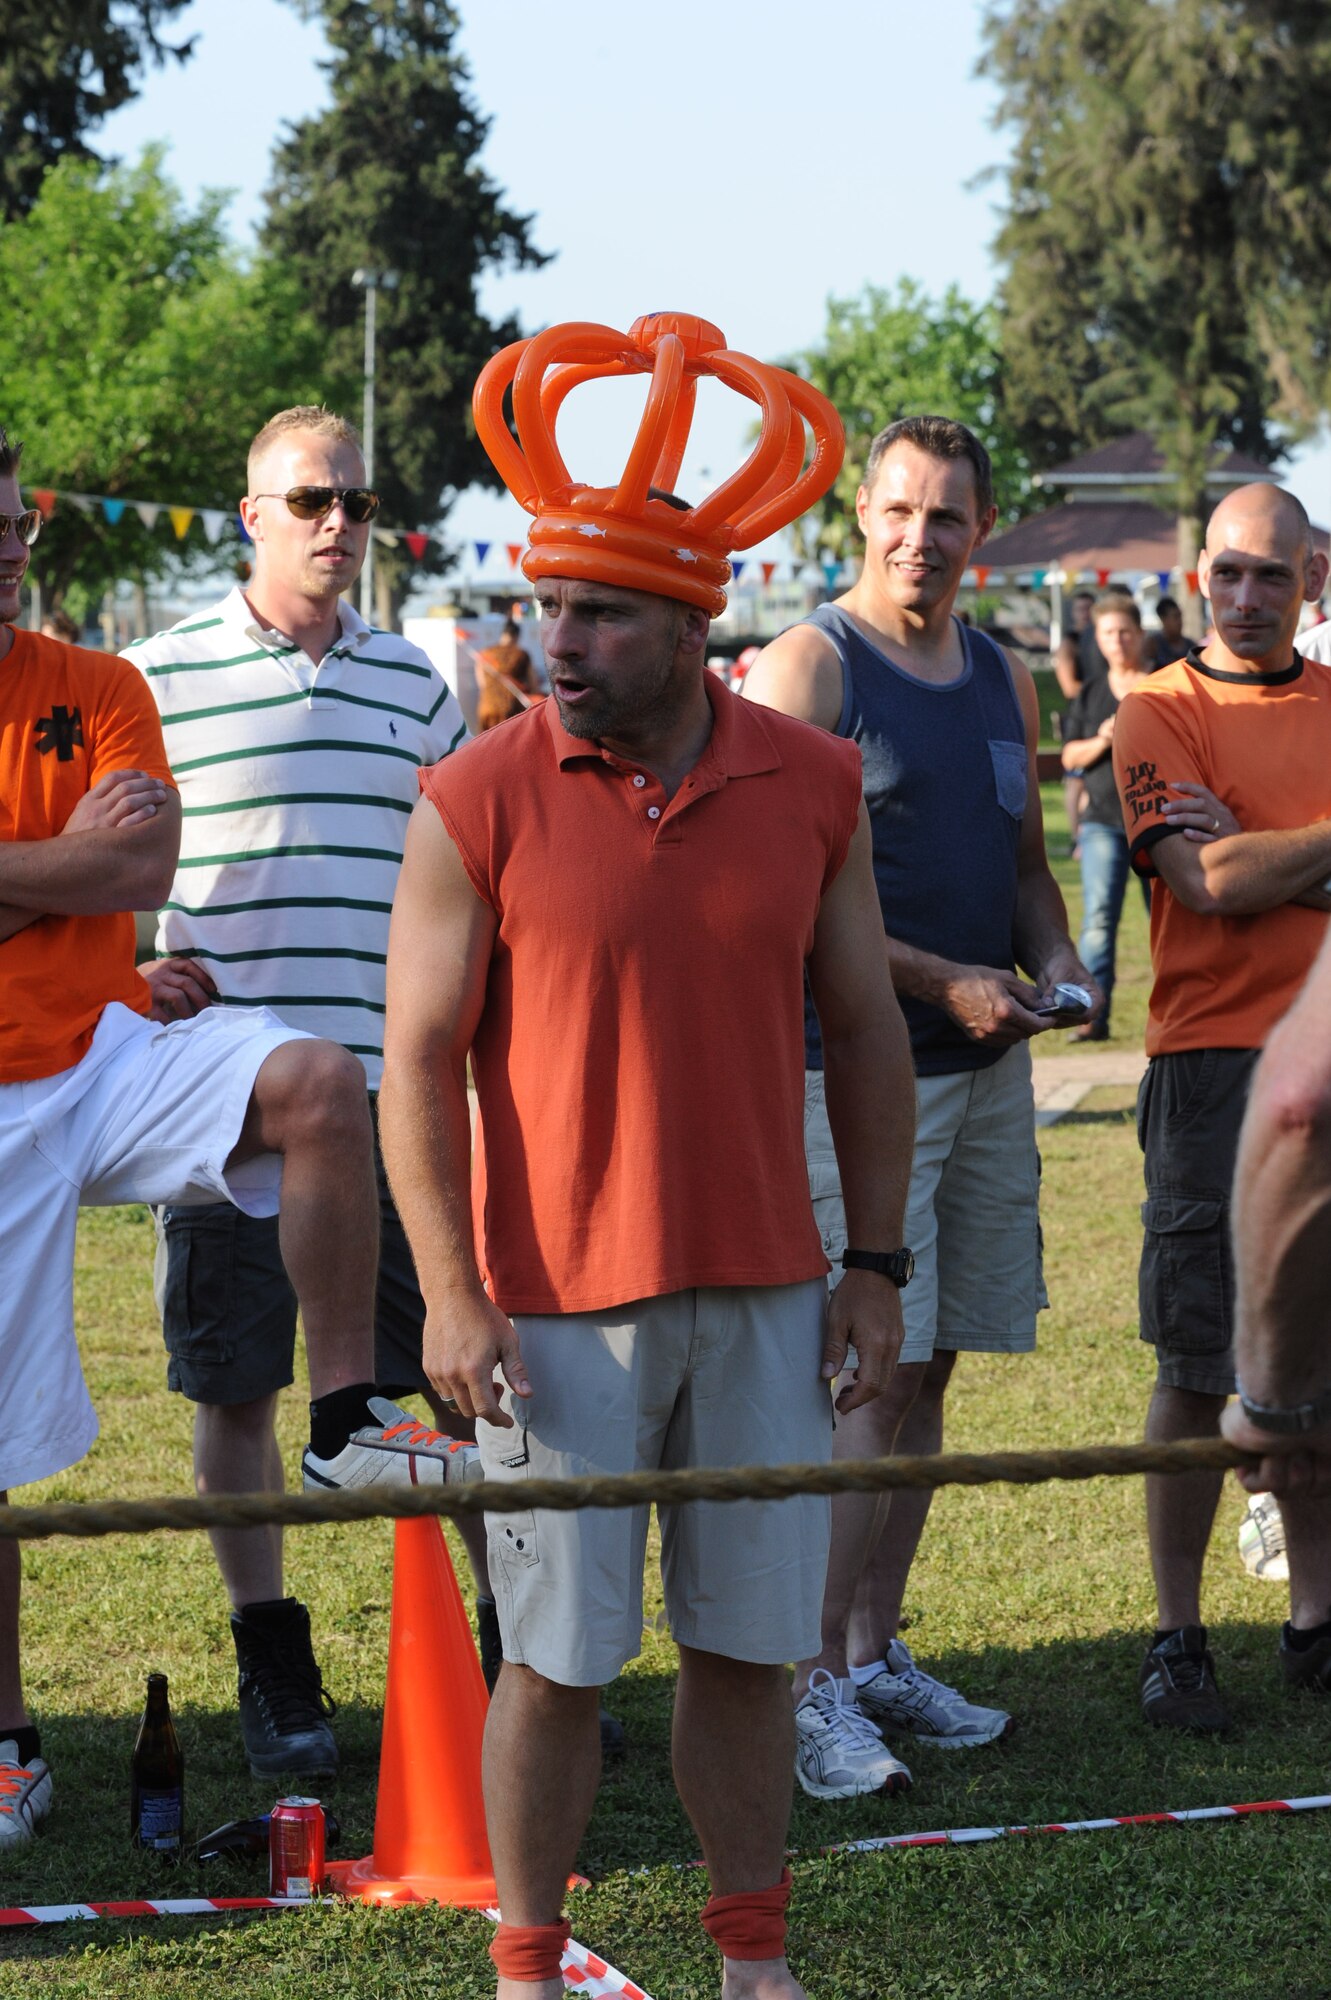 A Dutch soldier deployed to Incirlik Air Base in support of a NATO-led operation to boost Turkey’s air defense capabilities by providing Patriot missile batteries referees a touwtrekken toernooi (tug-of-war tournament) during a Koninginnedag, or Queen’s Day, celebration held at Arkadas Park April 25, 2013, Incirlik Air Base Turkey. Many attendees wore orange, the color of the Dutch royal family which traces its history back to William of Orange. (U.S. Air Force photo by 1st Lt. David Liapis/Released)